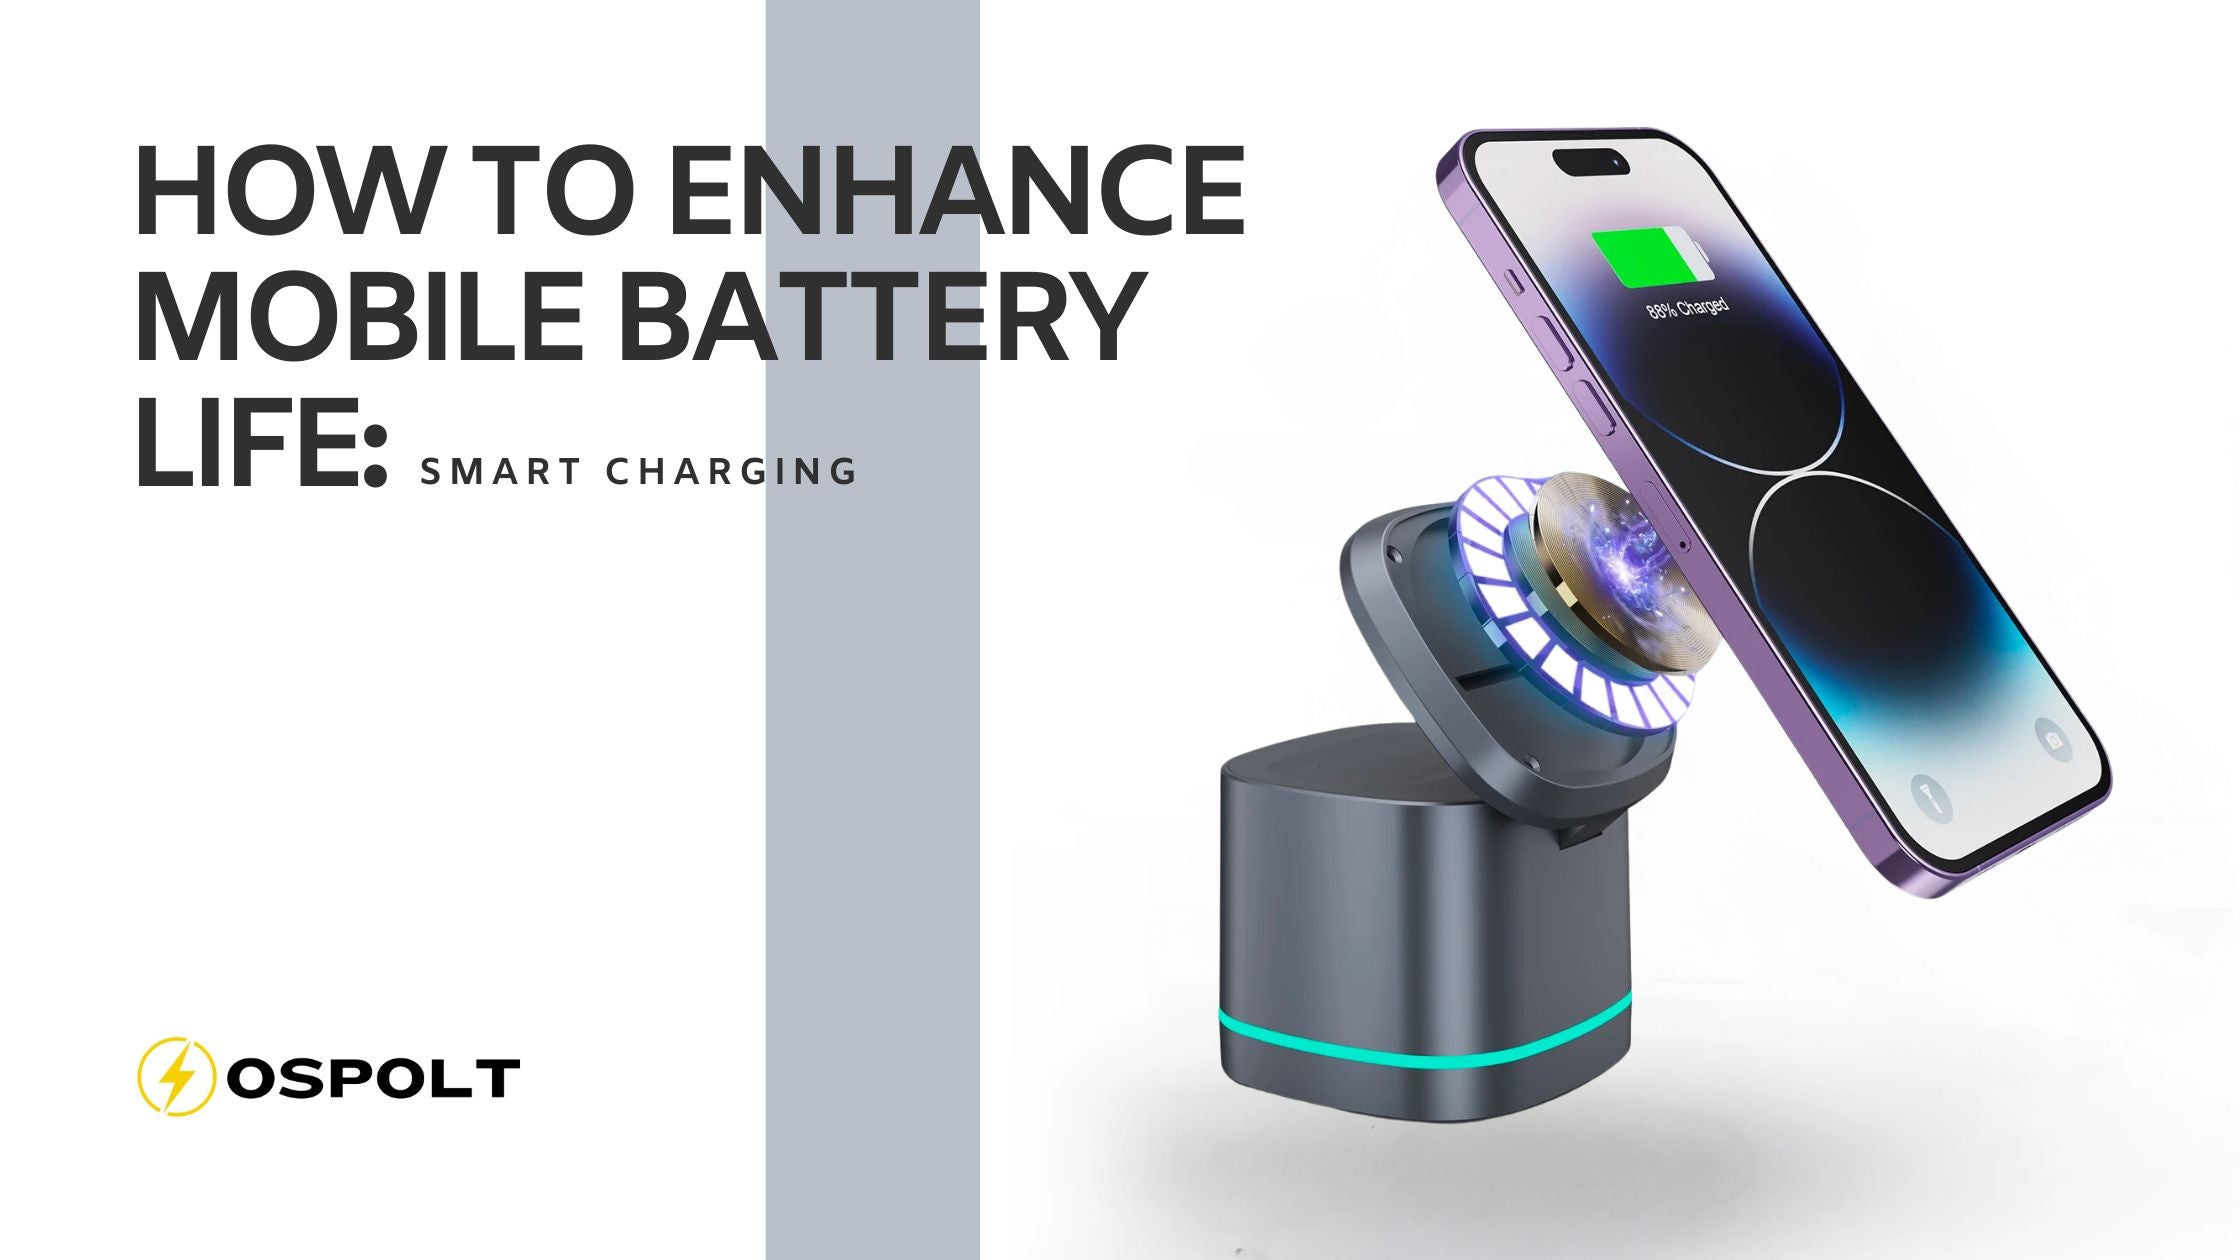 How to Enhance Mobile Battery Life with Smart Charging